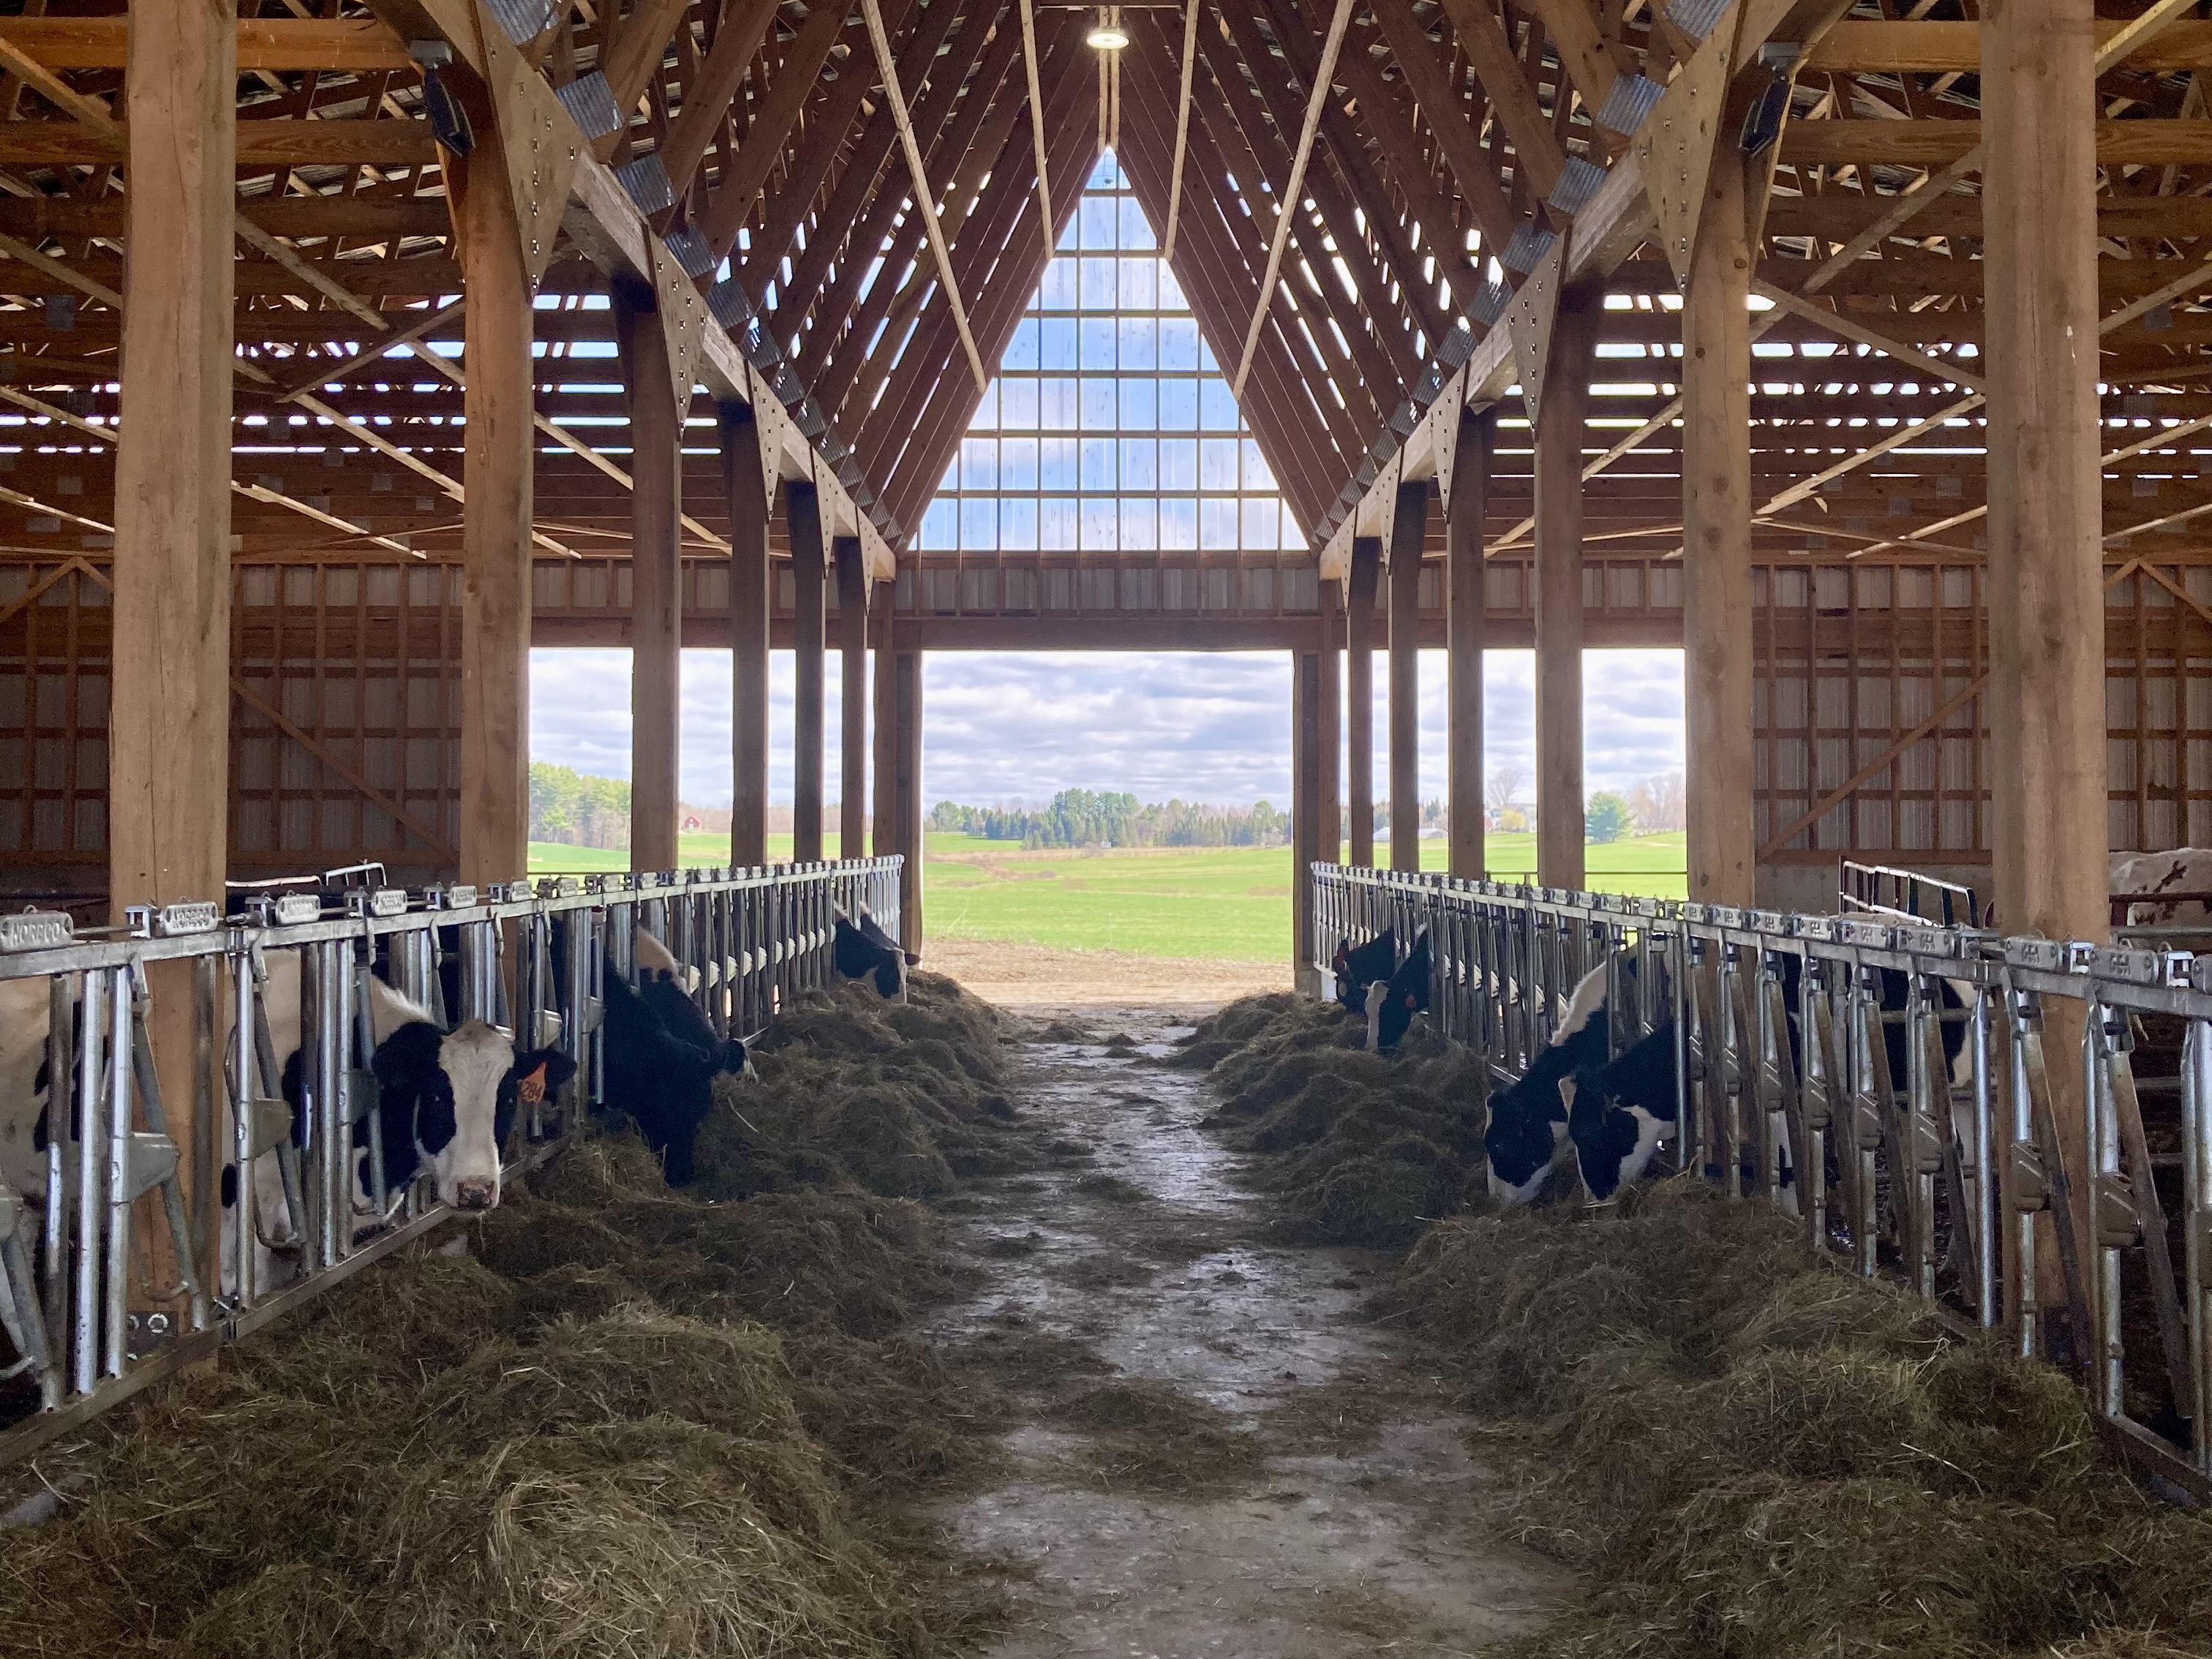 Cows in the barn at Sheepscot Valley Farm